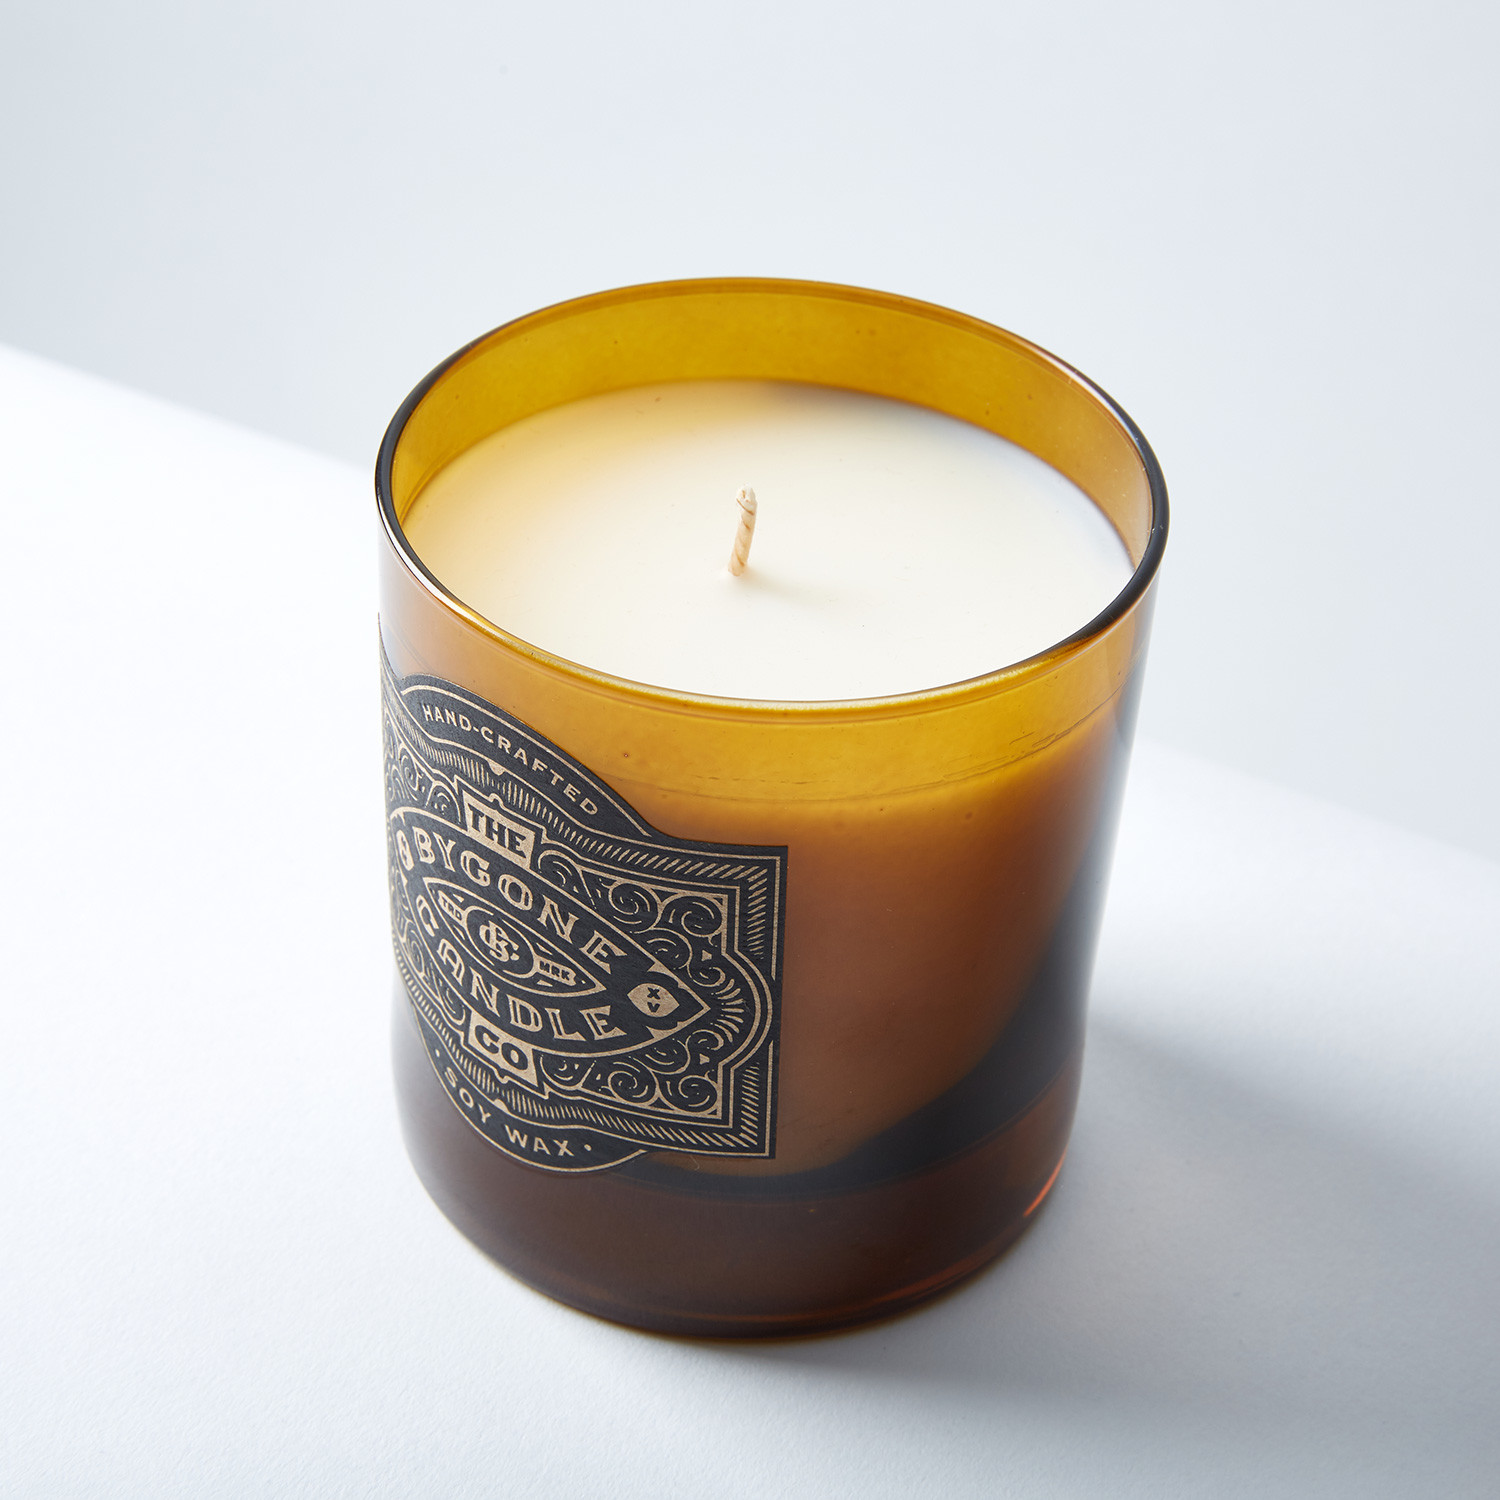 Sandalwood + Musk Summer Candle - Bygone Candle Co. - Touch of Modern